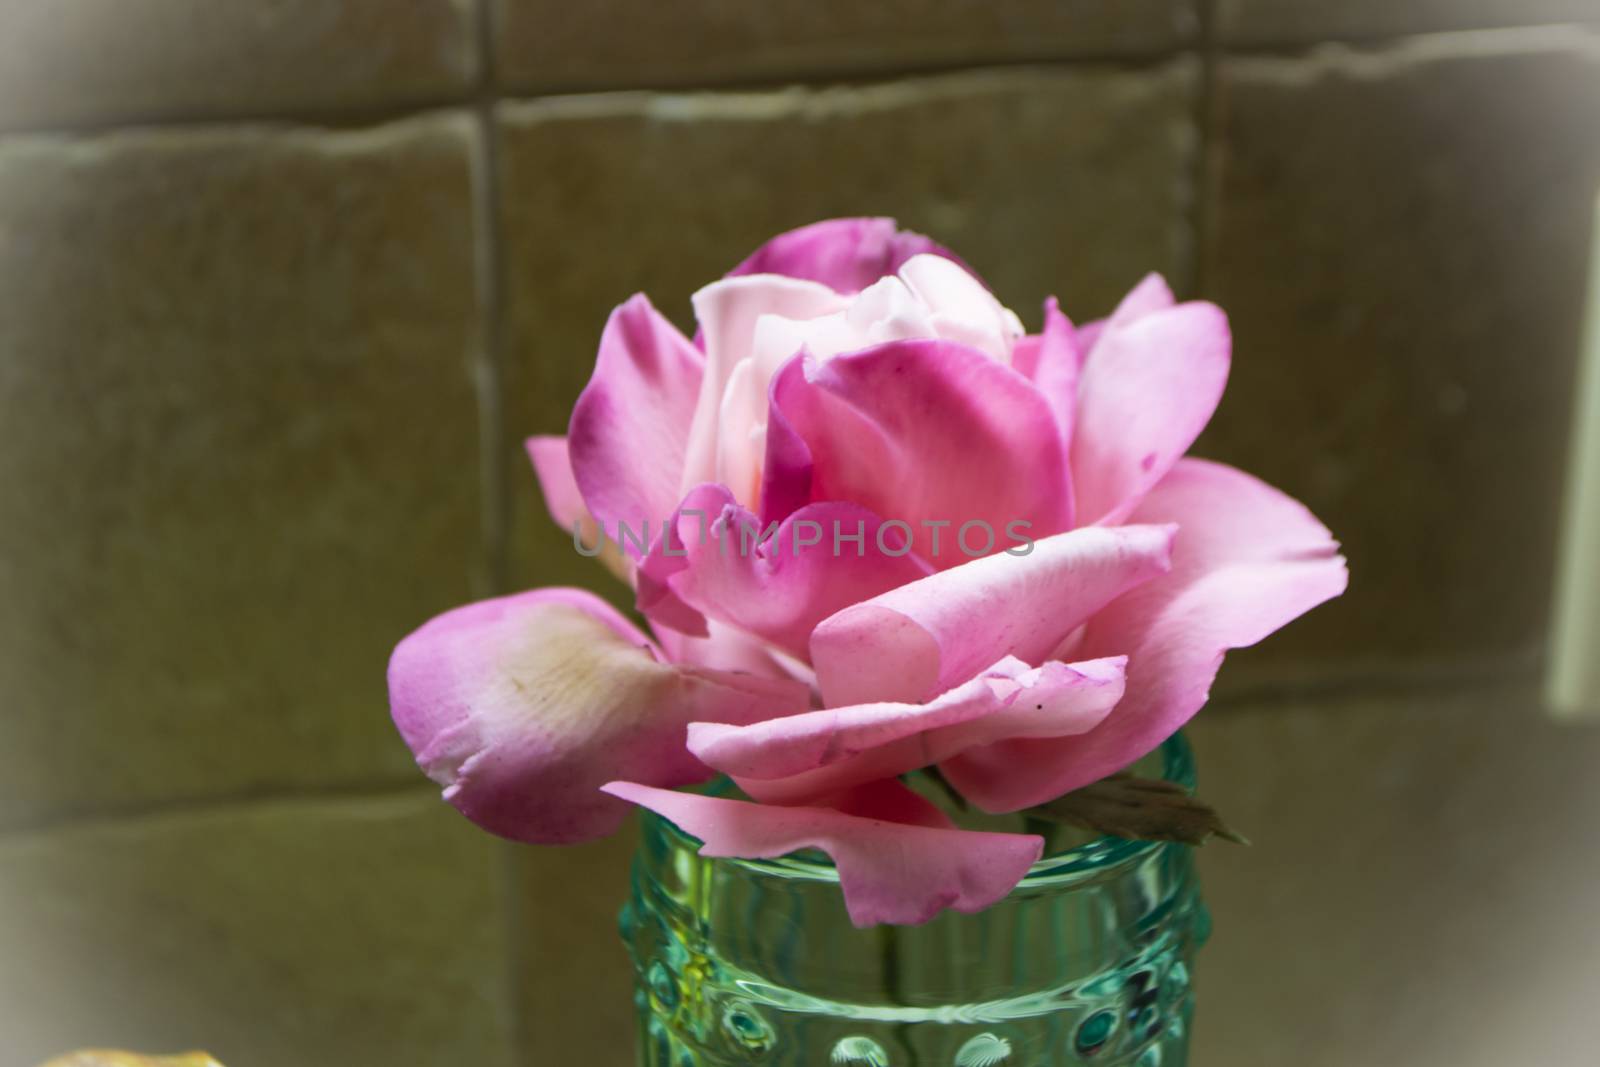 Wine pink color rose. The flower is handmade by sugar fondant paste